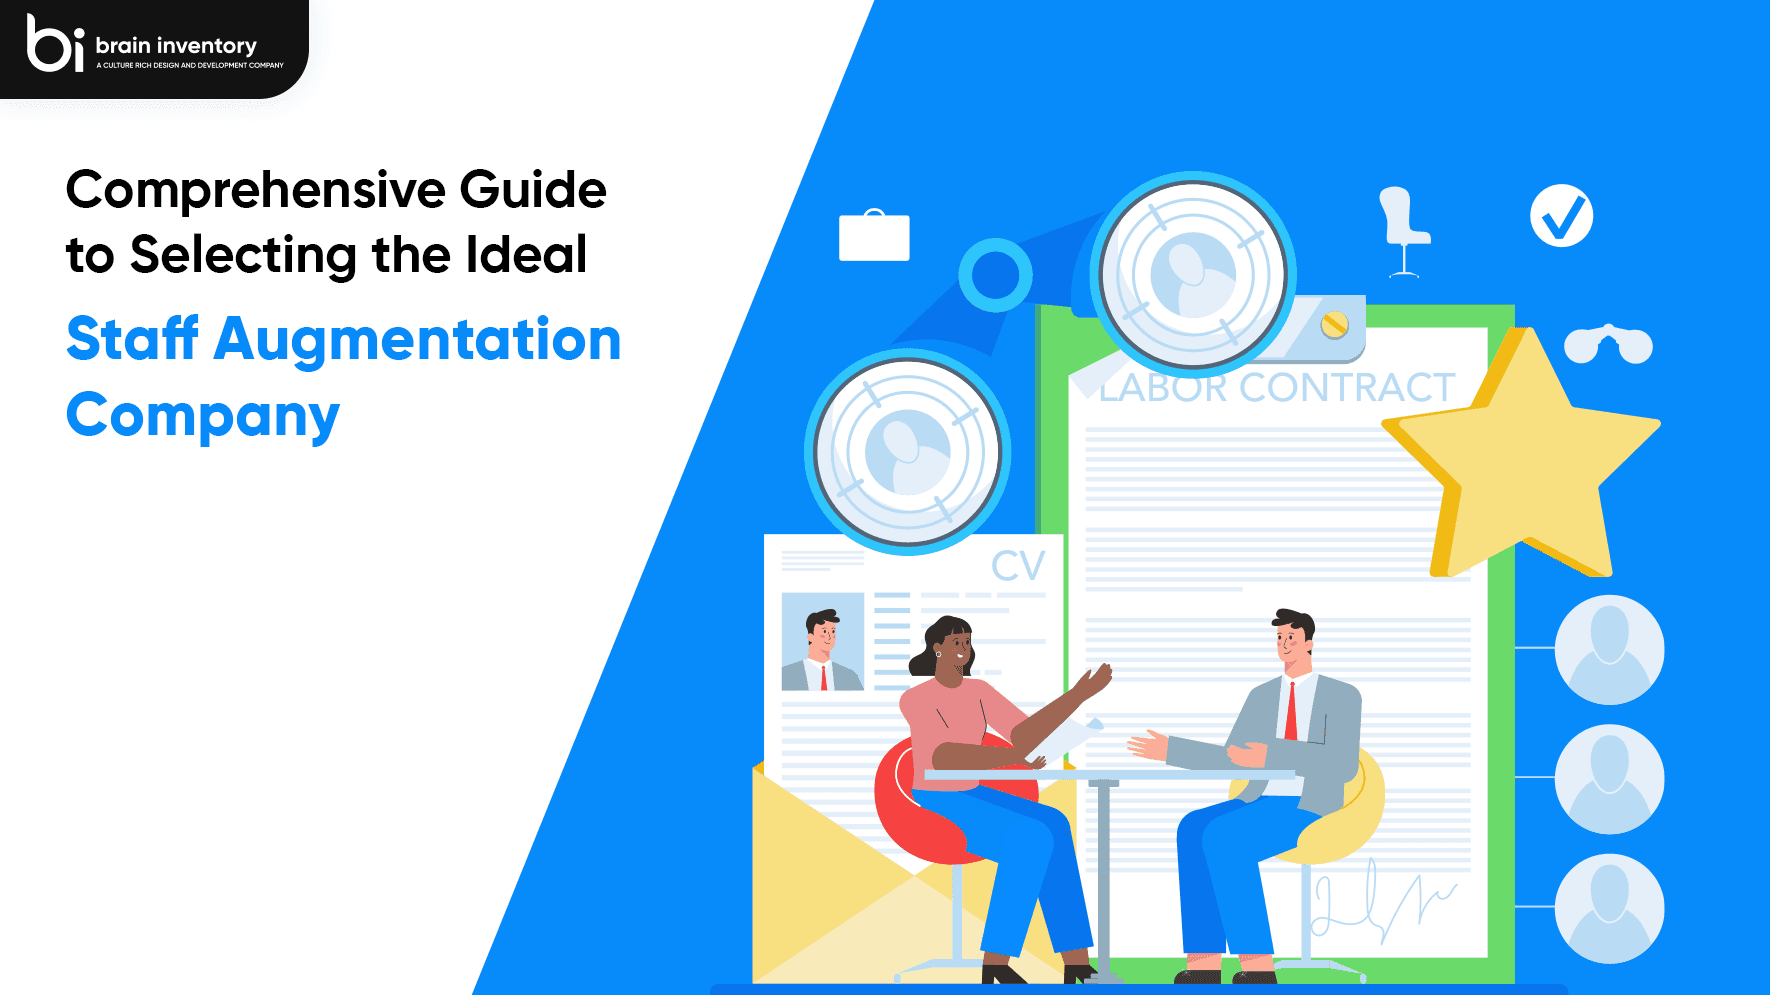 Comprehensive Guide to Selecting the Ideal Staff Augmentation Company